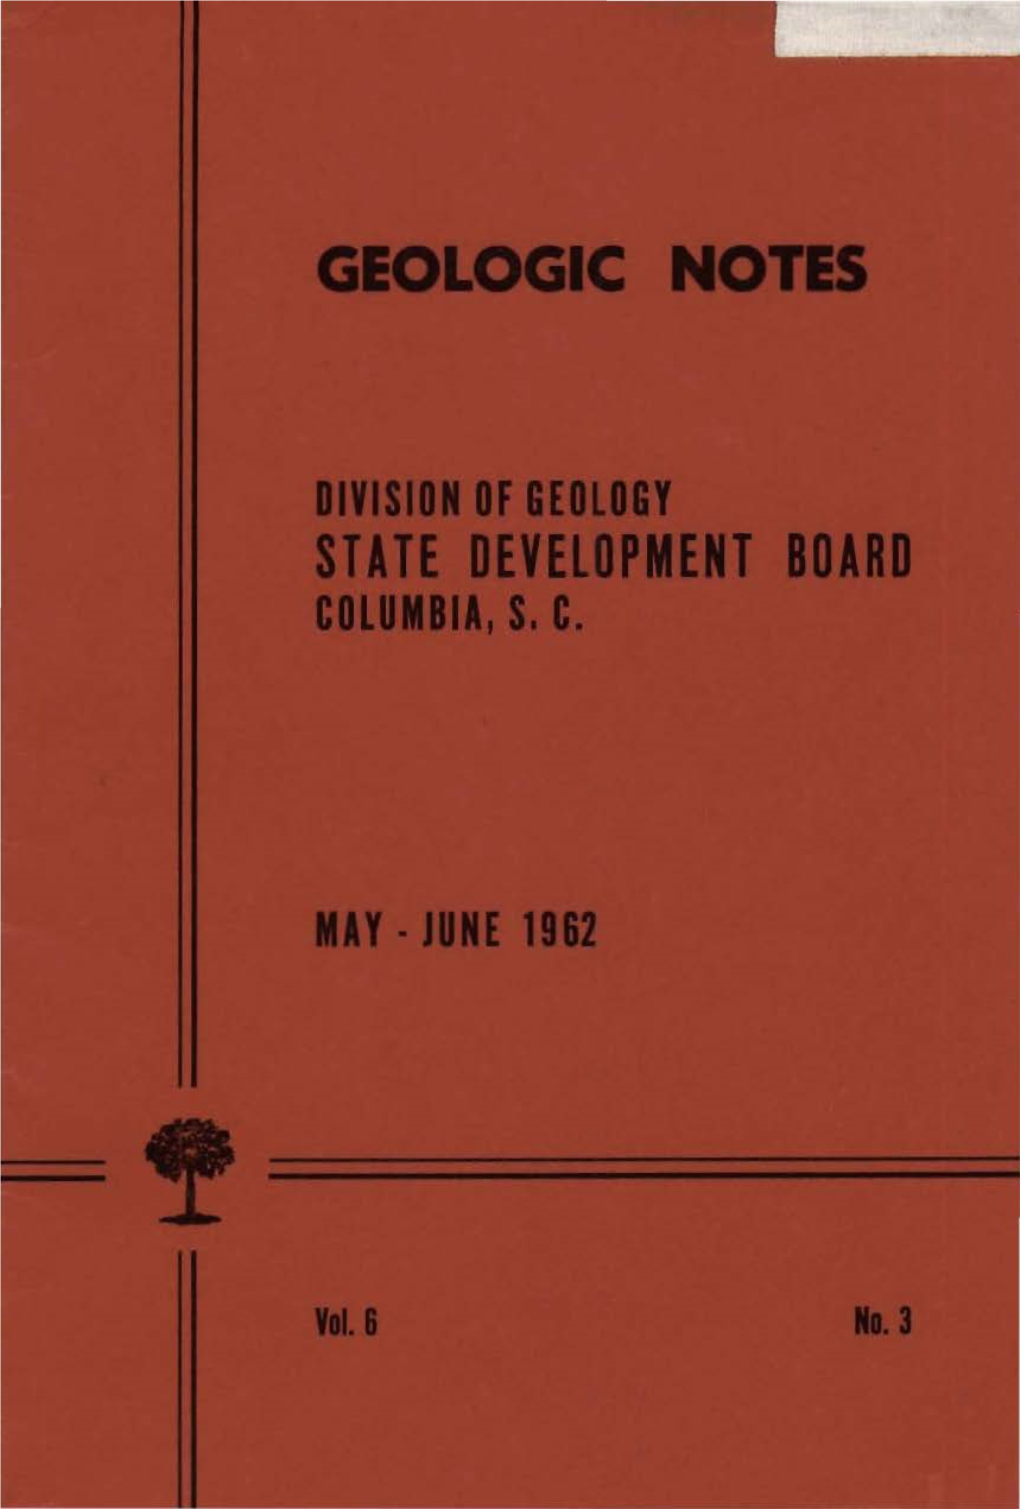 DNR GS Geologic Notes 1962-05